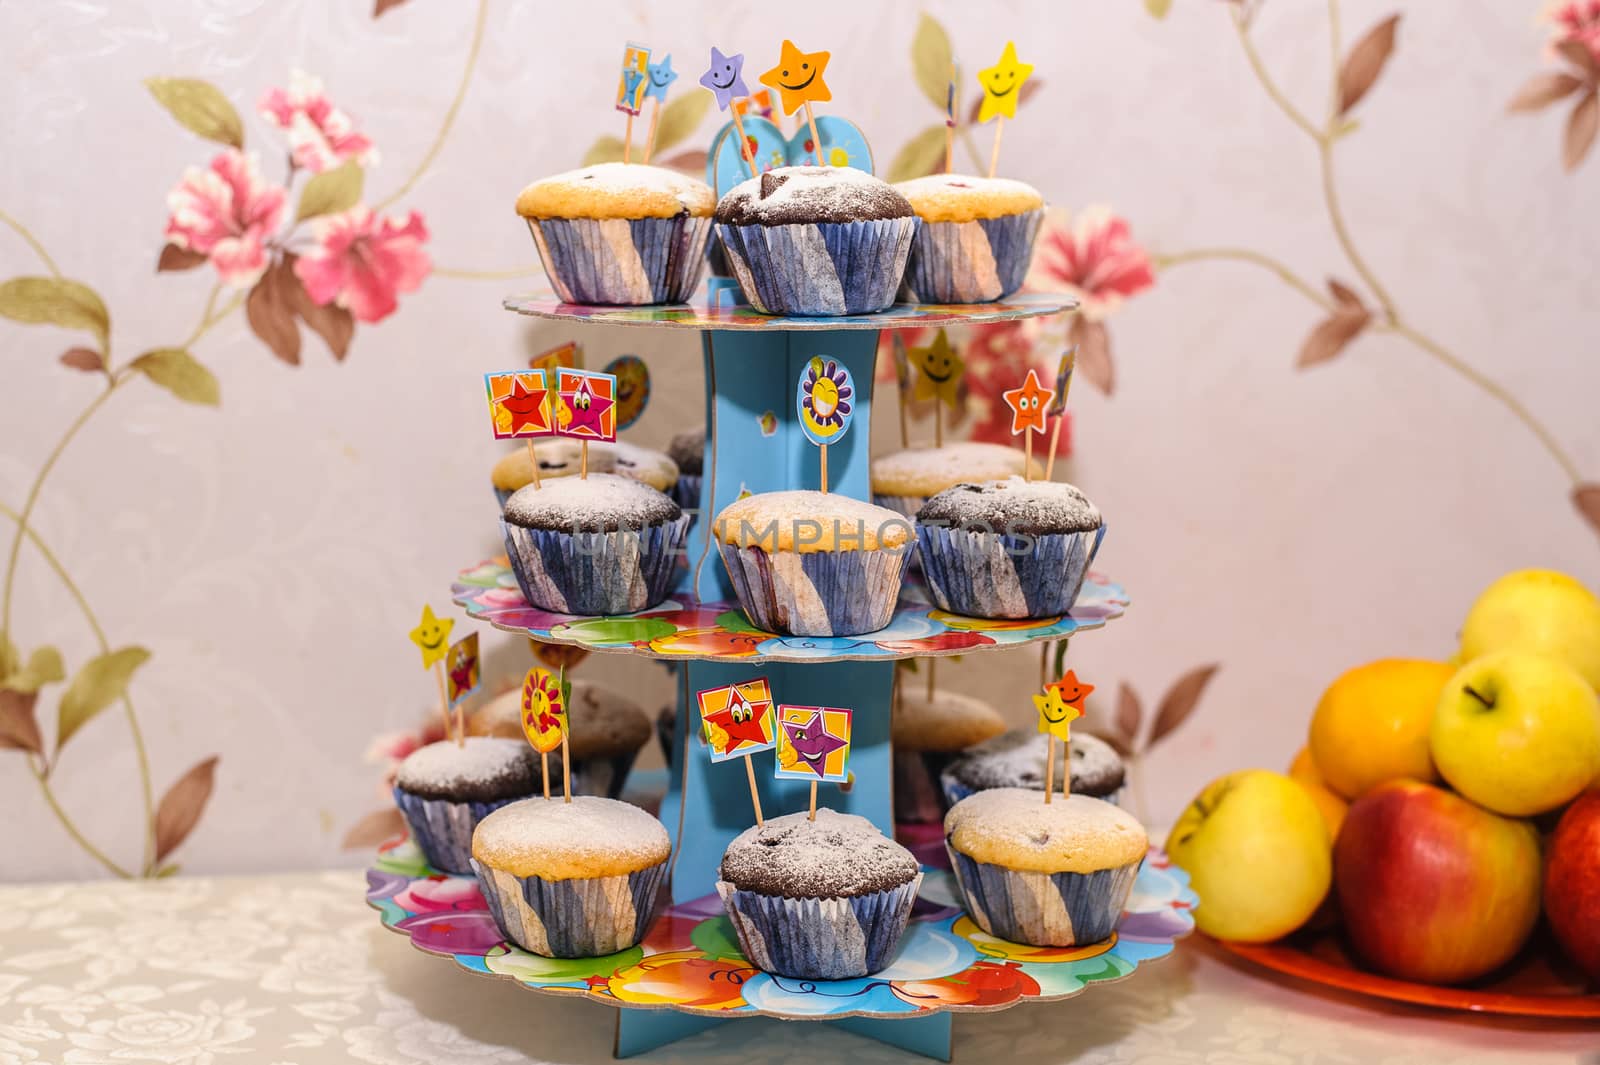 holiday cupcakes with funny flags and a plate with apples on the table